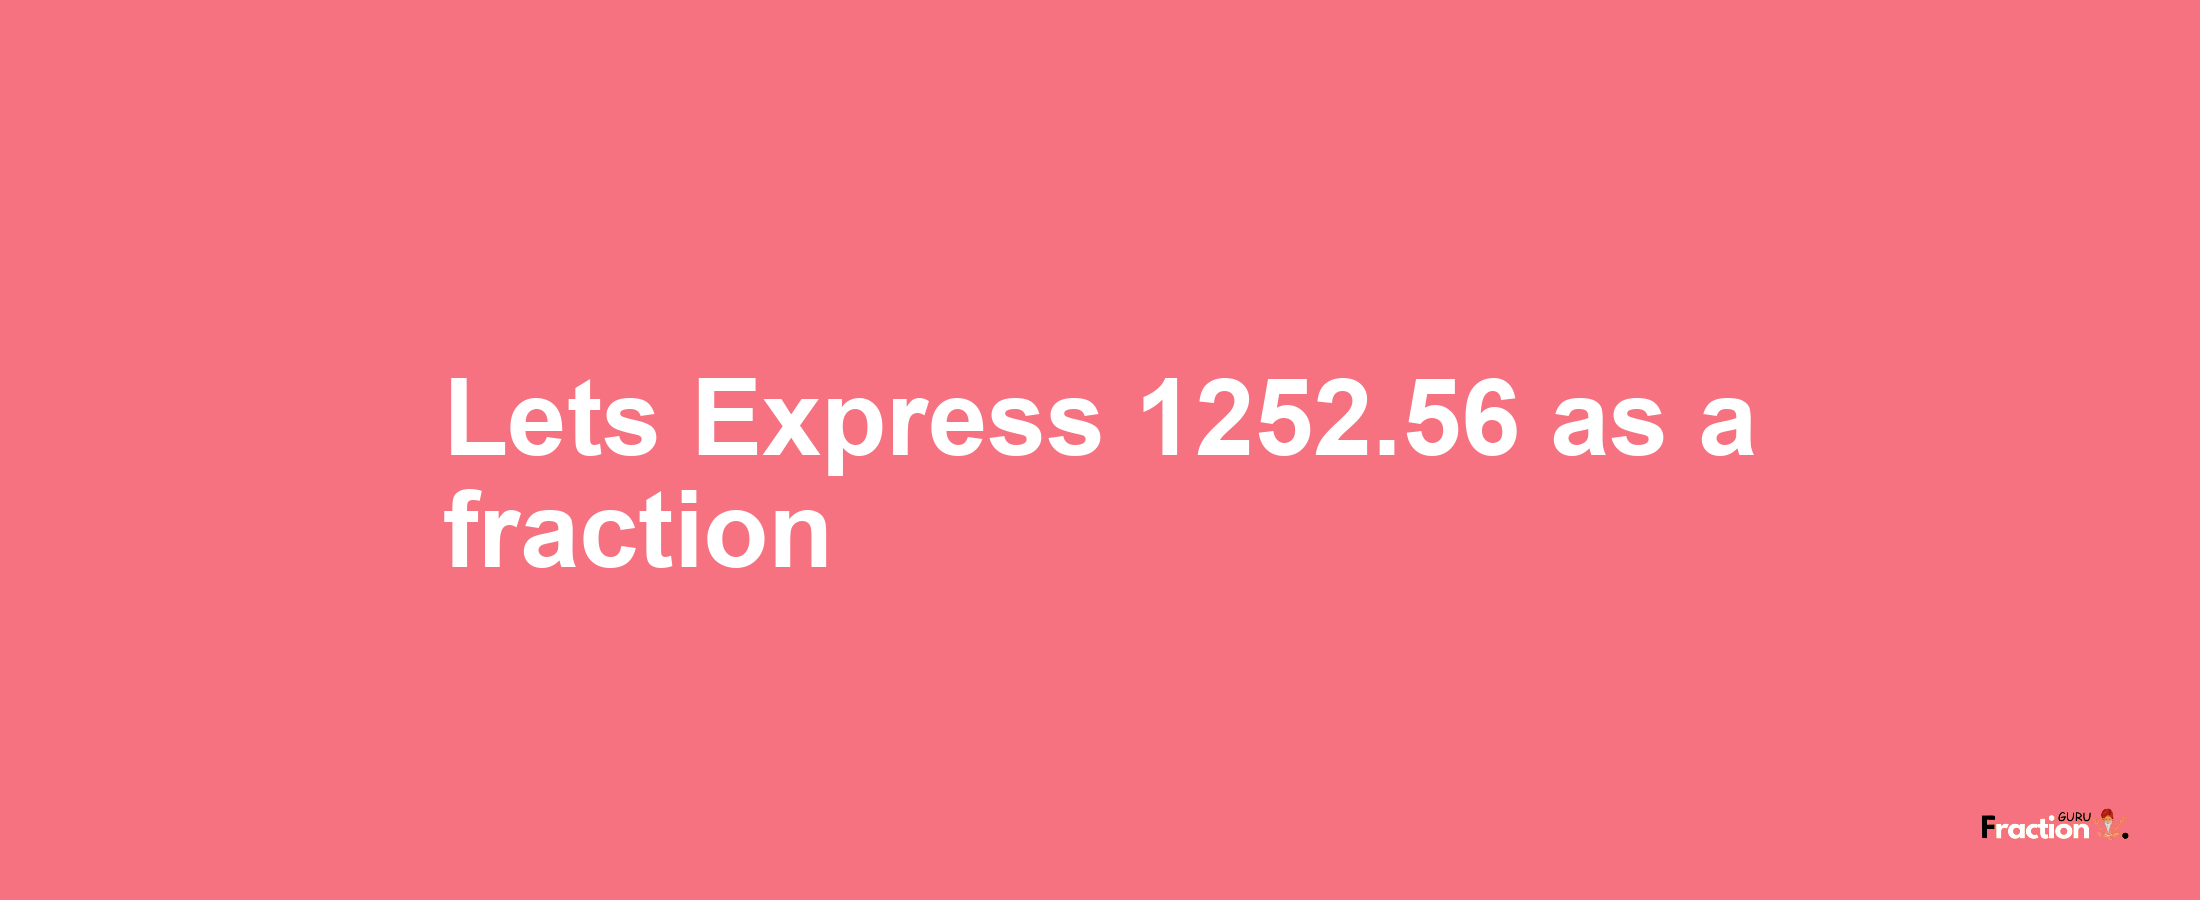 Lets Express 1252.56 as afraction